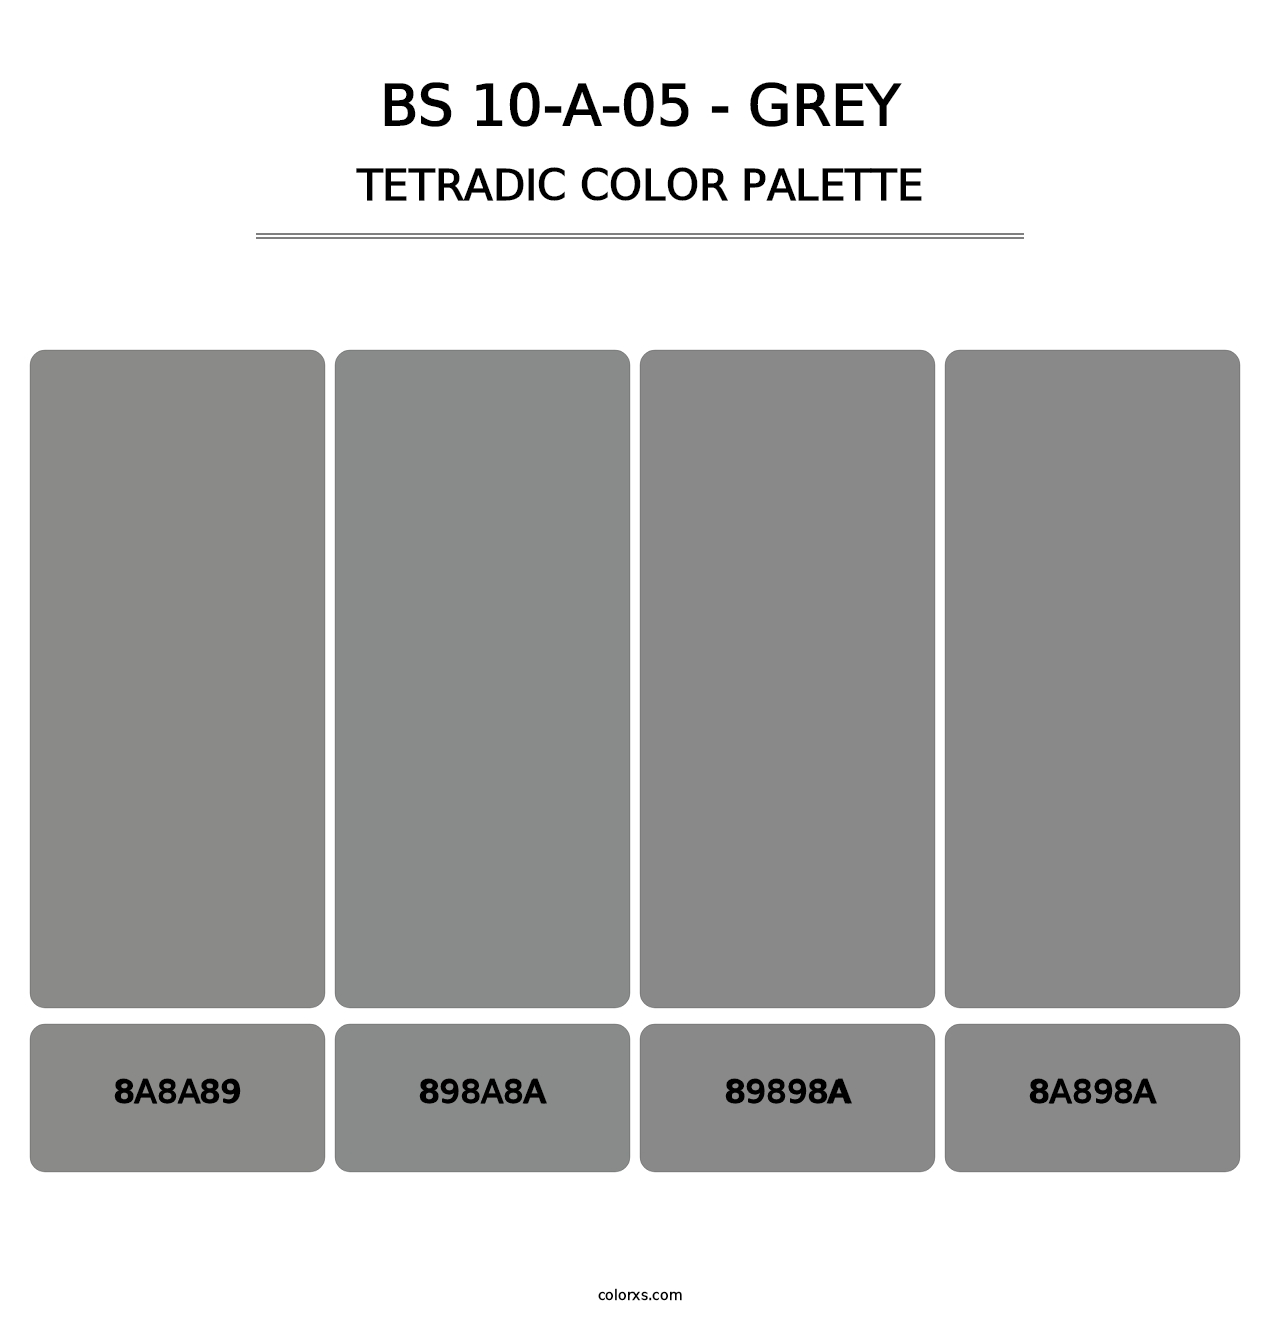 BS 10-A-05 - Grey - Tetradic Color Palette